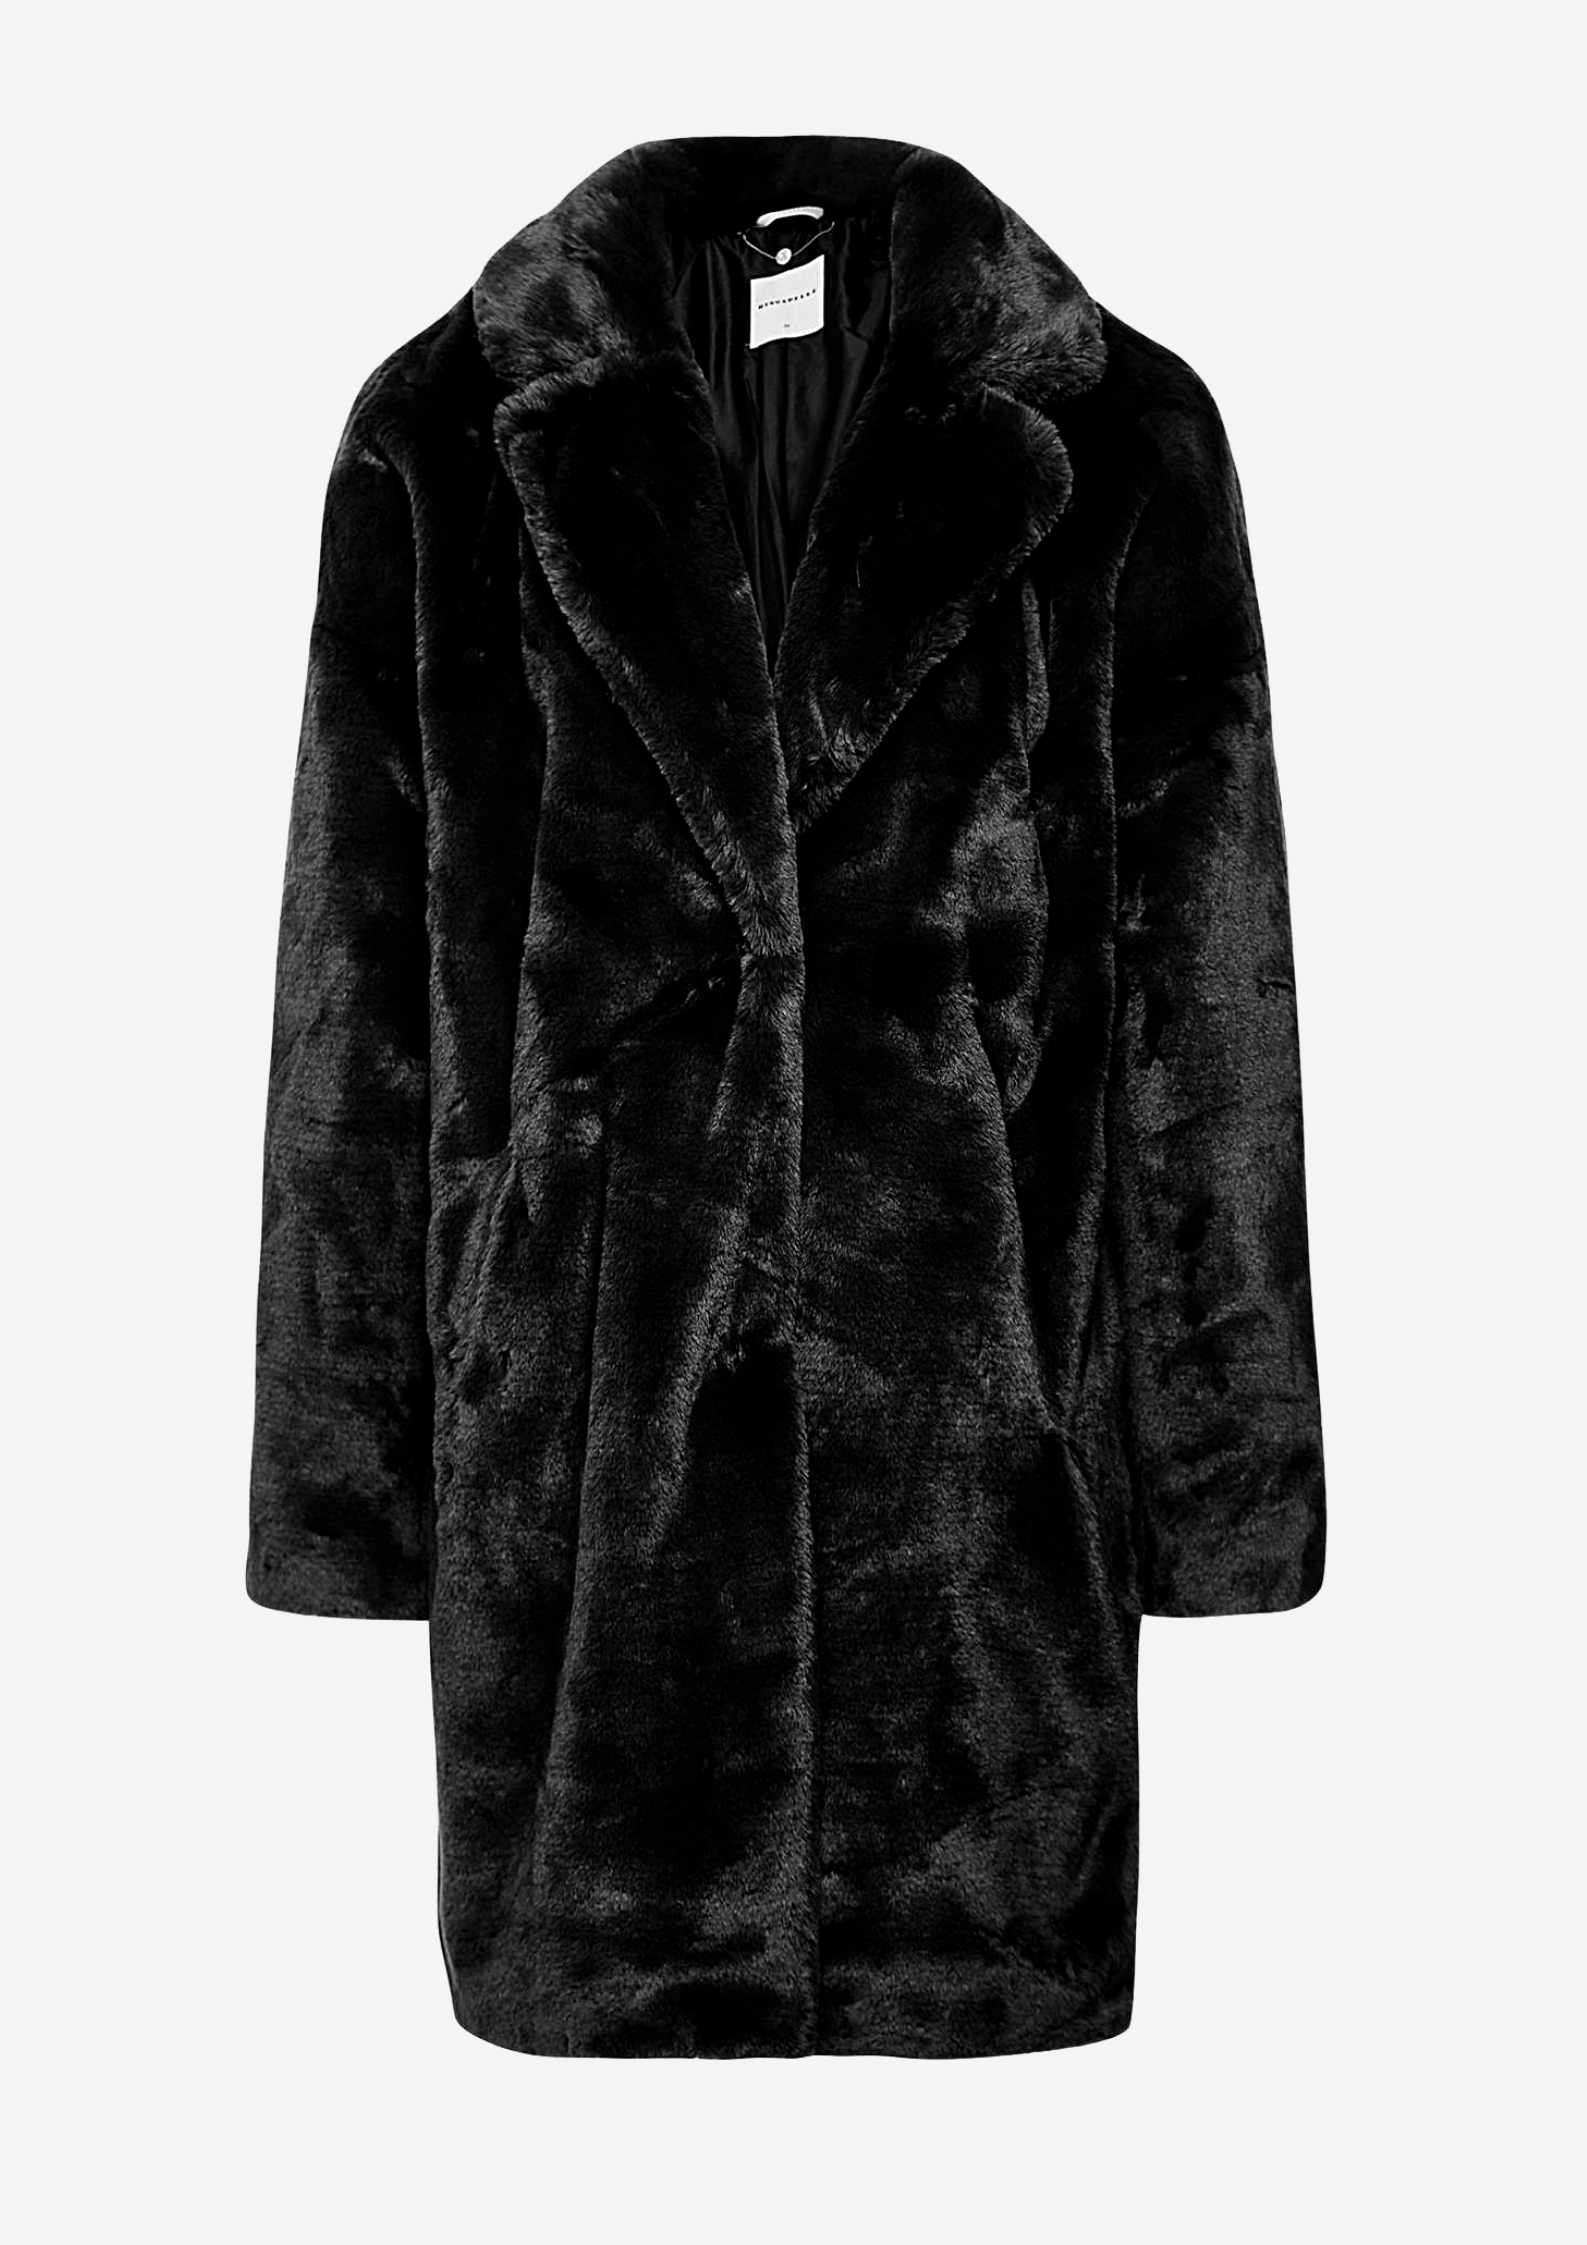 Black faux fur knee length jacket with notch lapel and two side pockets